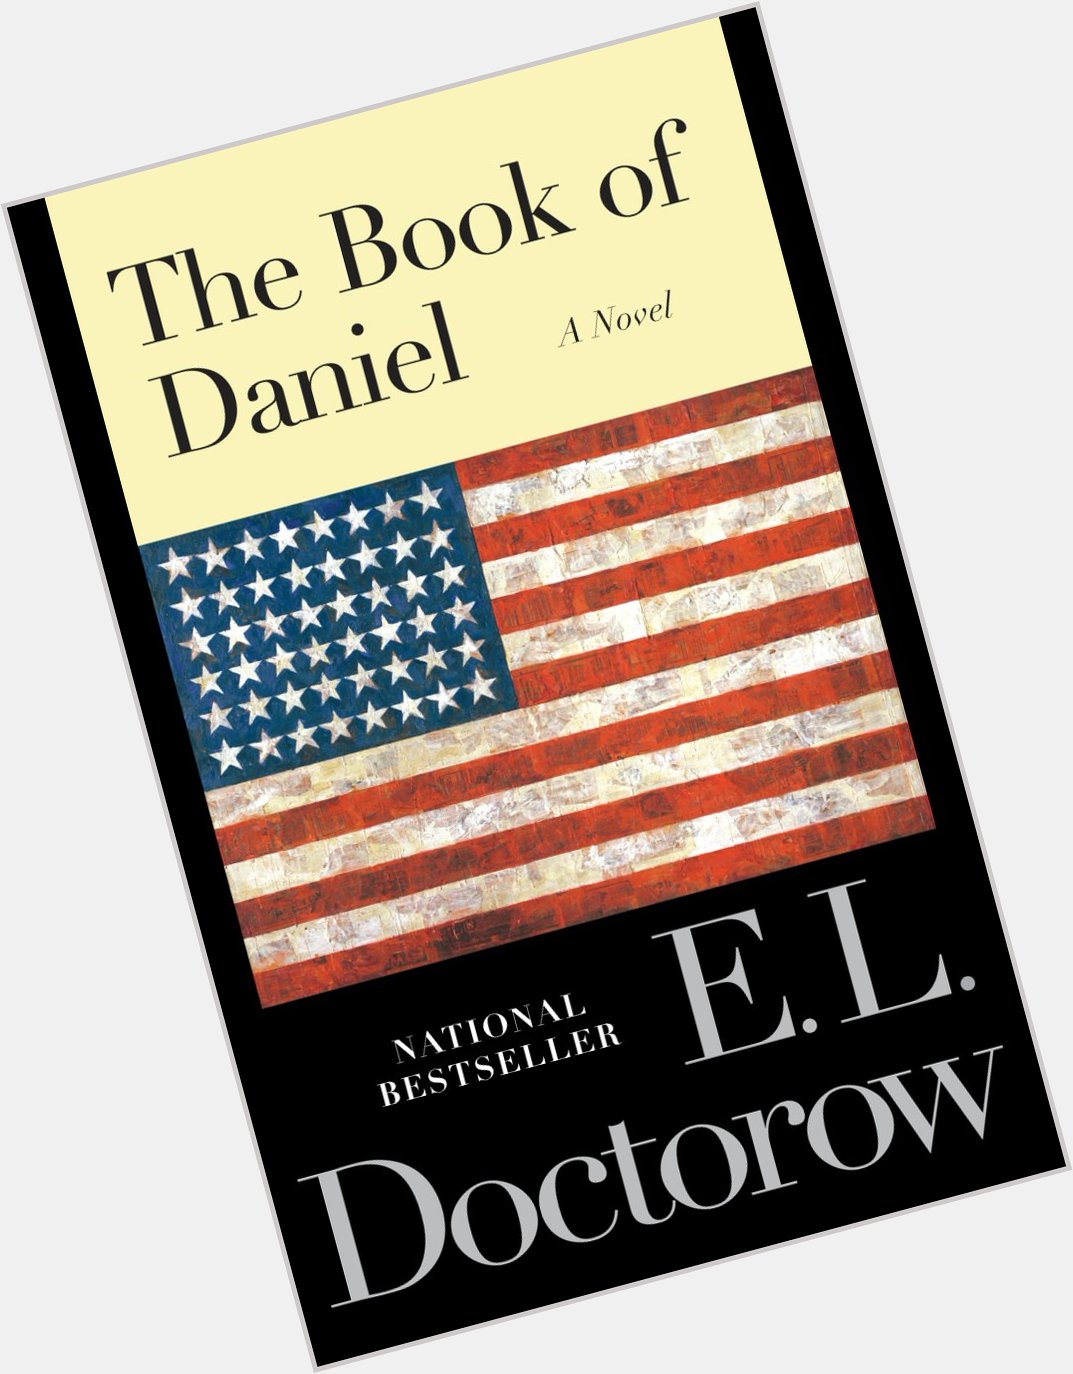 We are happy and honored to celebrate the birthday of a great American writer, our own E. L. Doctorow. 